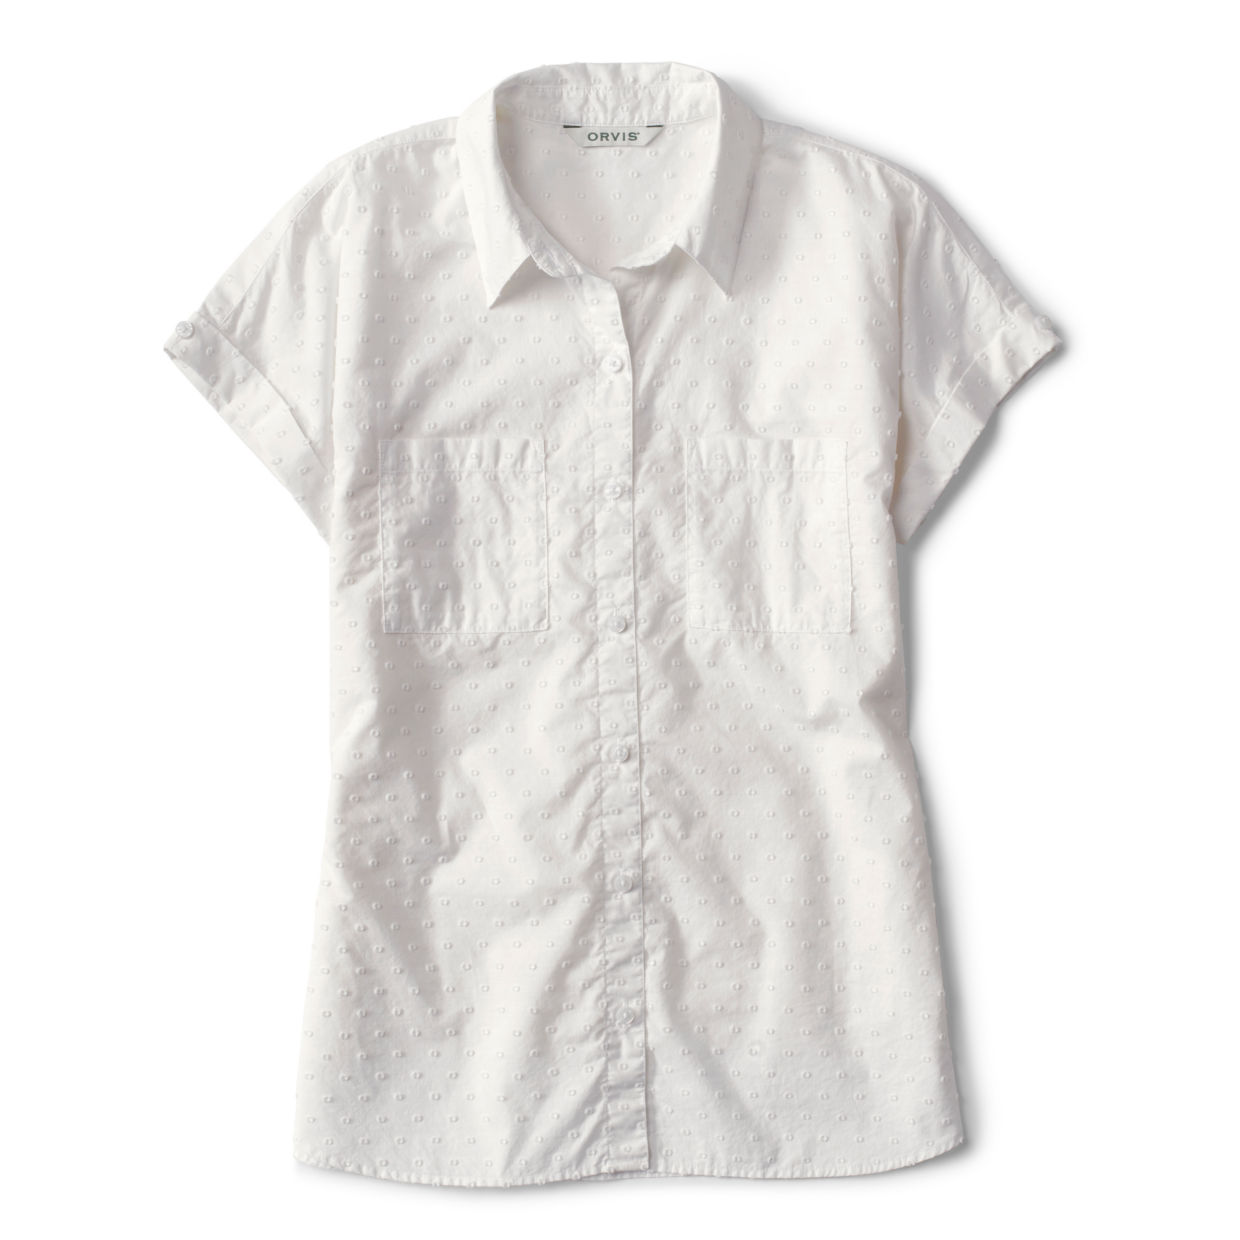 Women's Easy Solid Short-Sleeved Camp Shirt White Size Xs Cotton Orvis